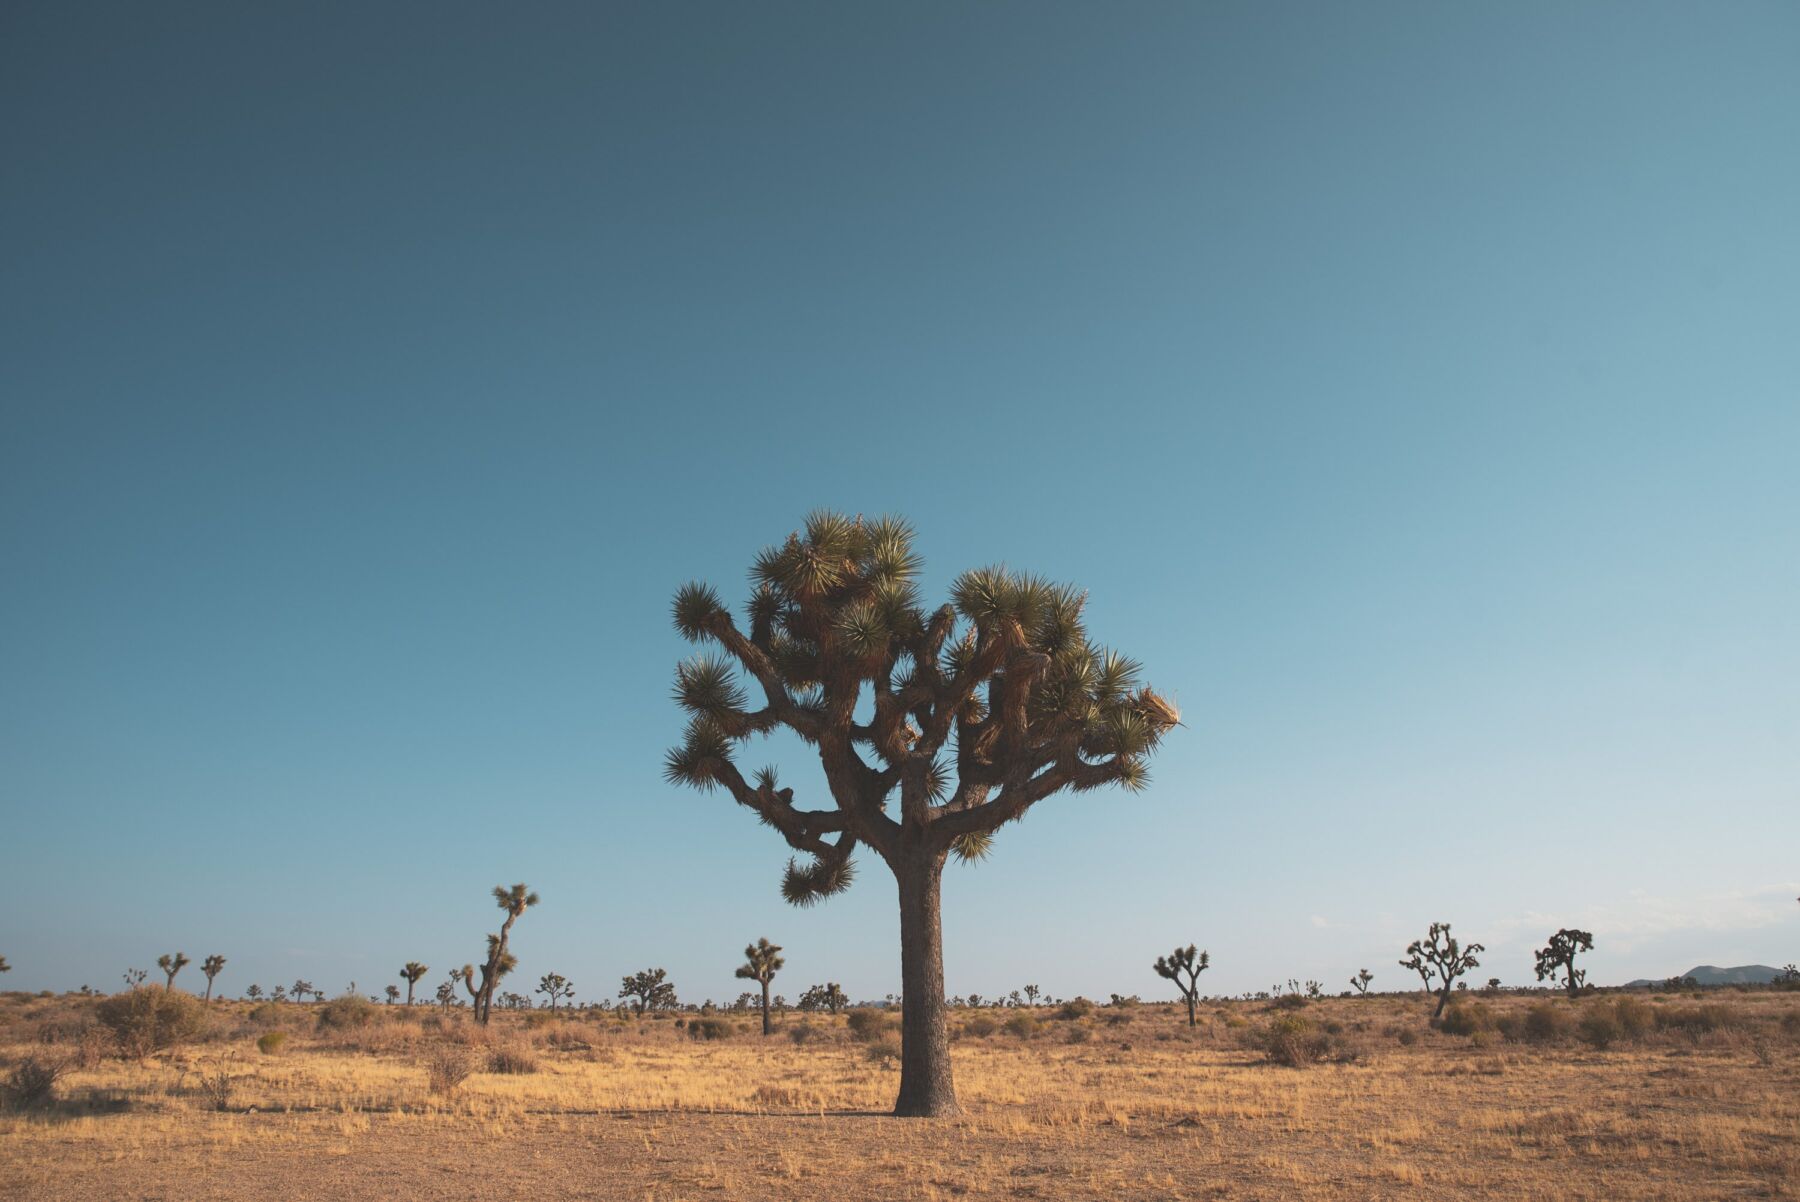 resilient Joshua Tree, representing a digital transformation strategy that endures